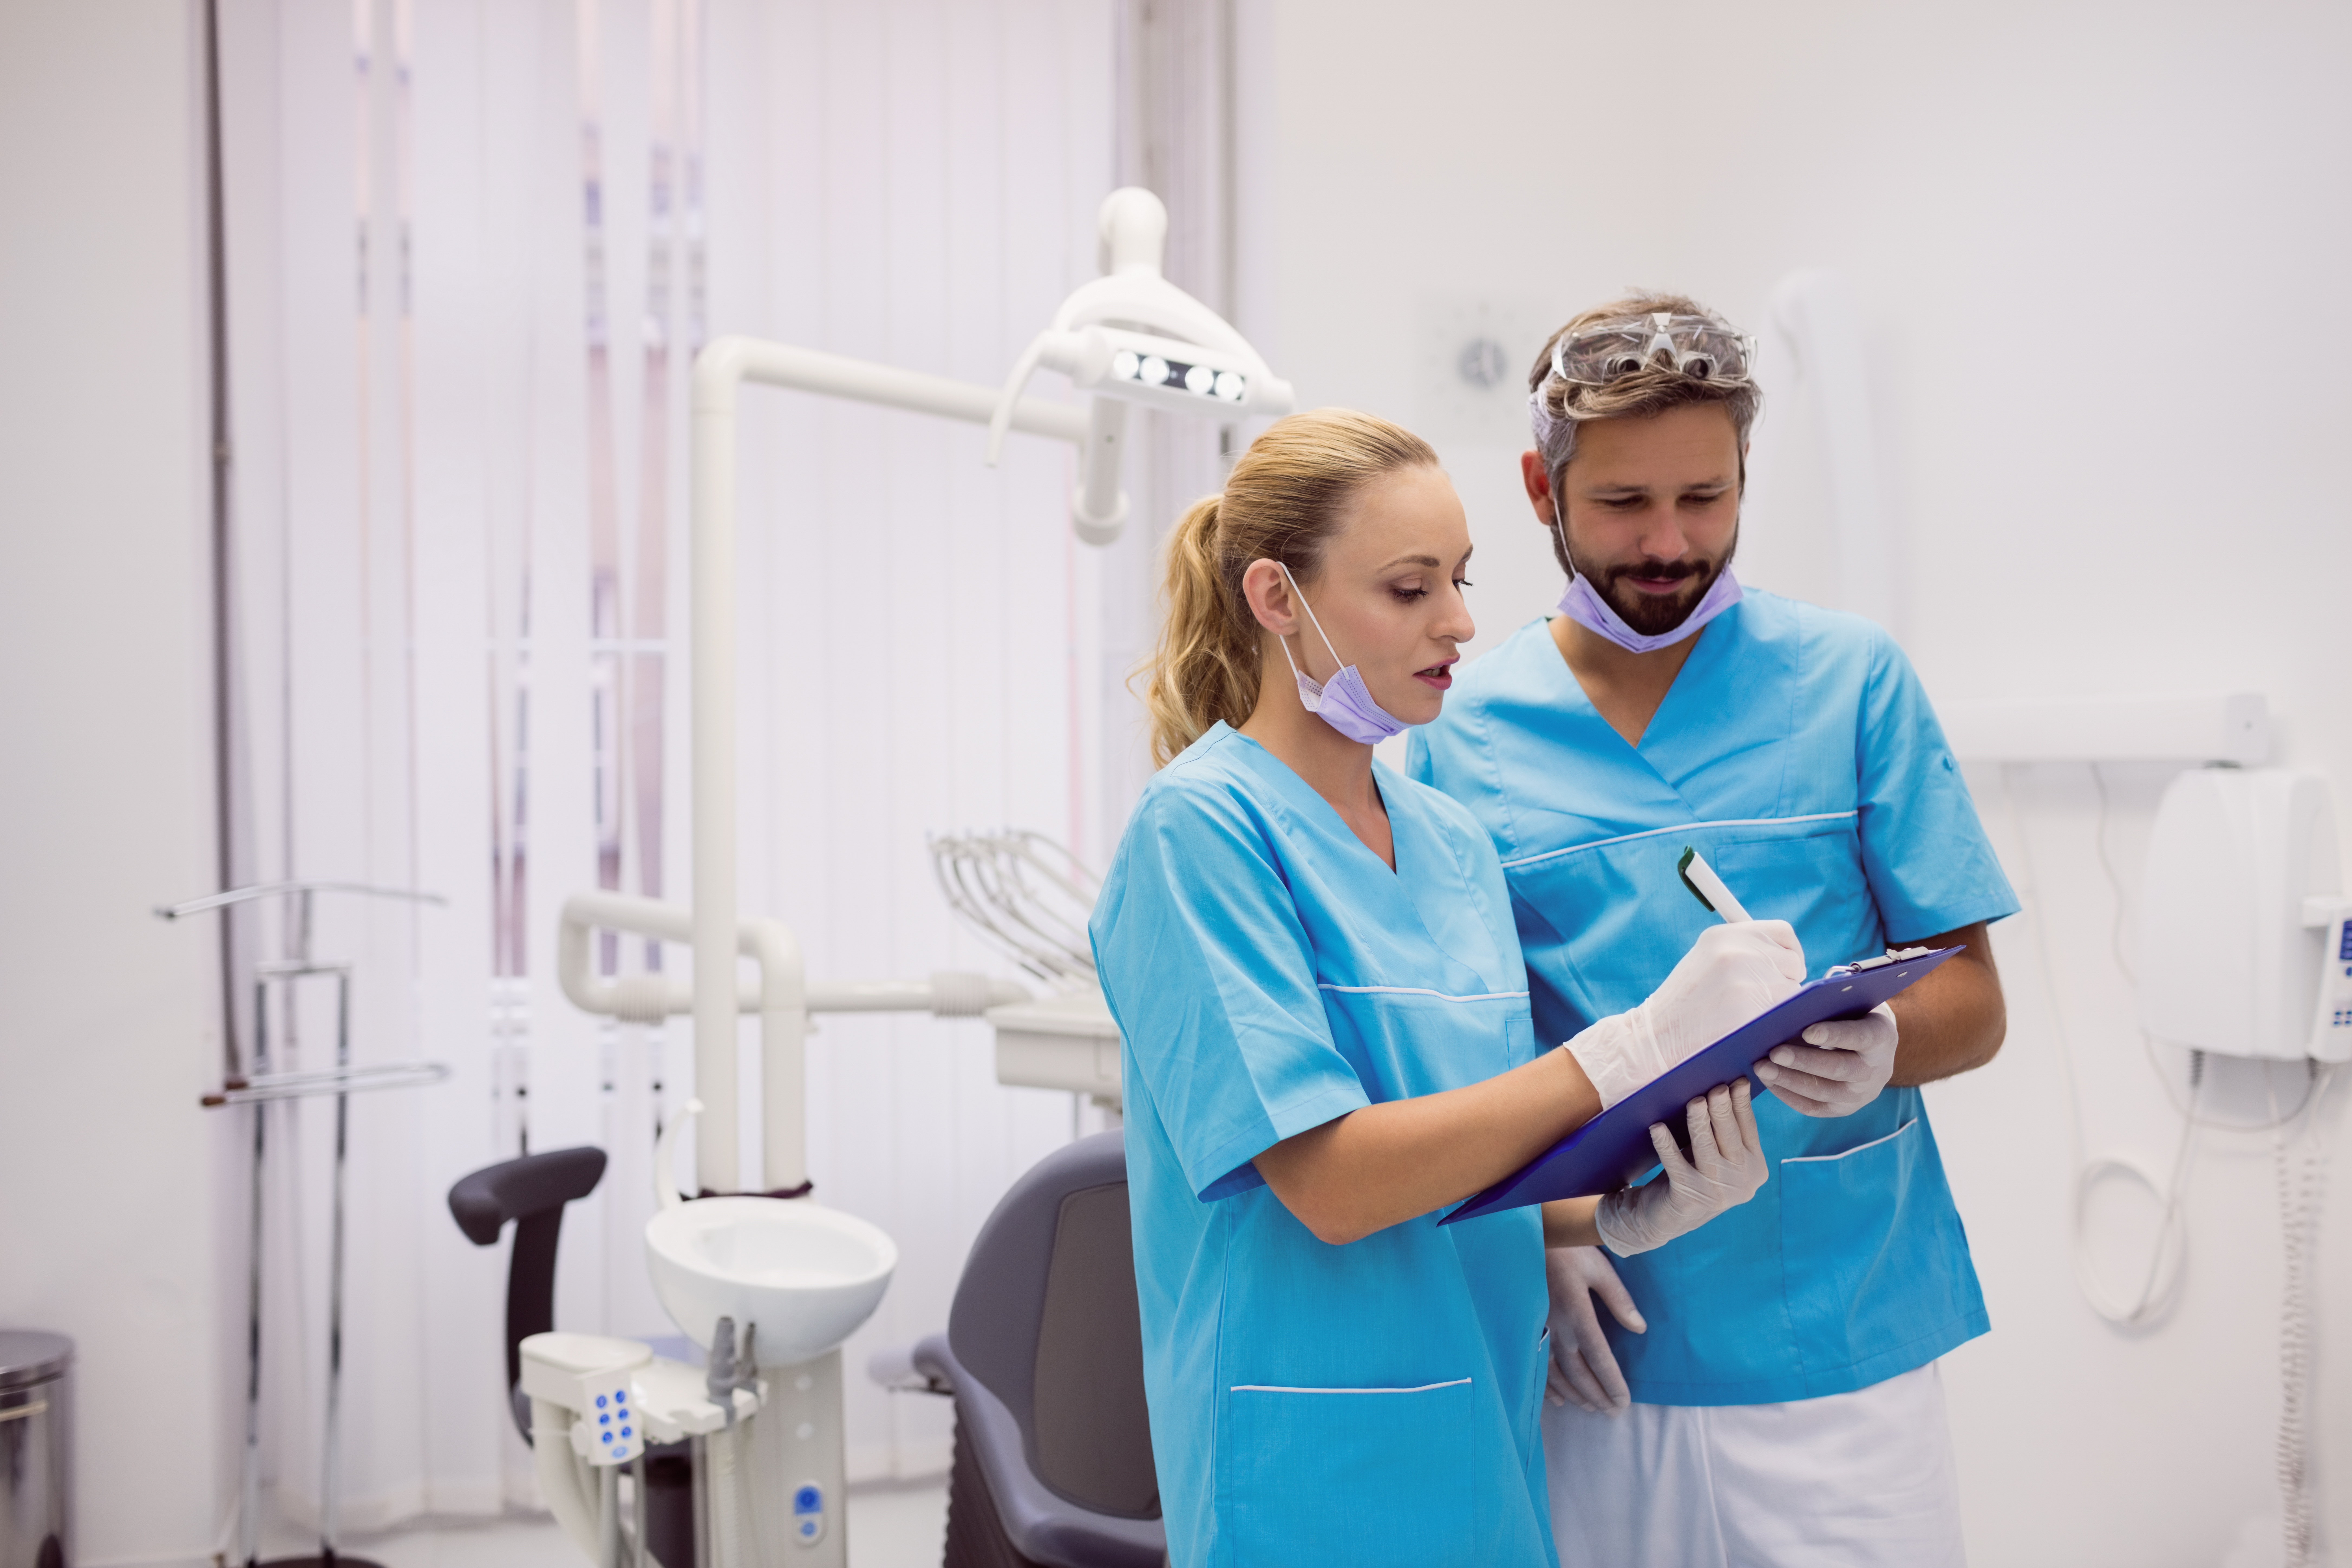 This image shows two people in blue medical uniforms in a dentist
                room. They are reviewing something on a clip board